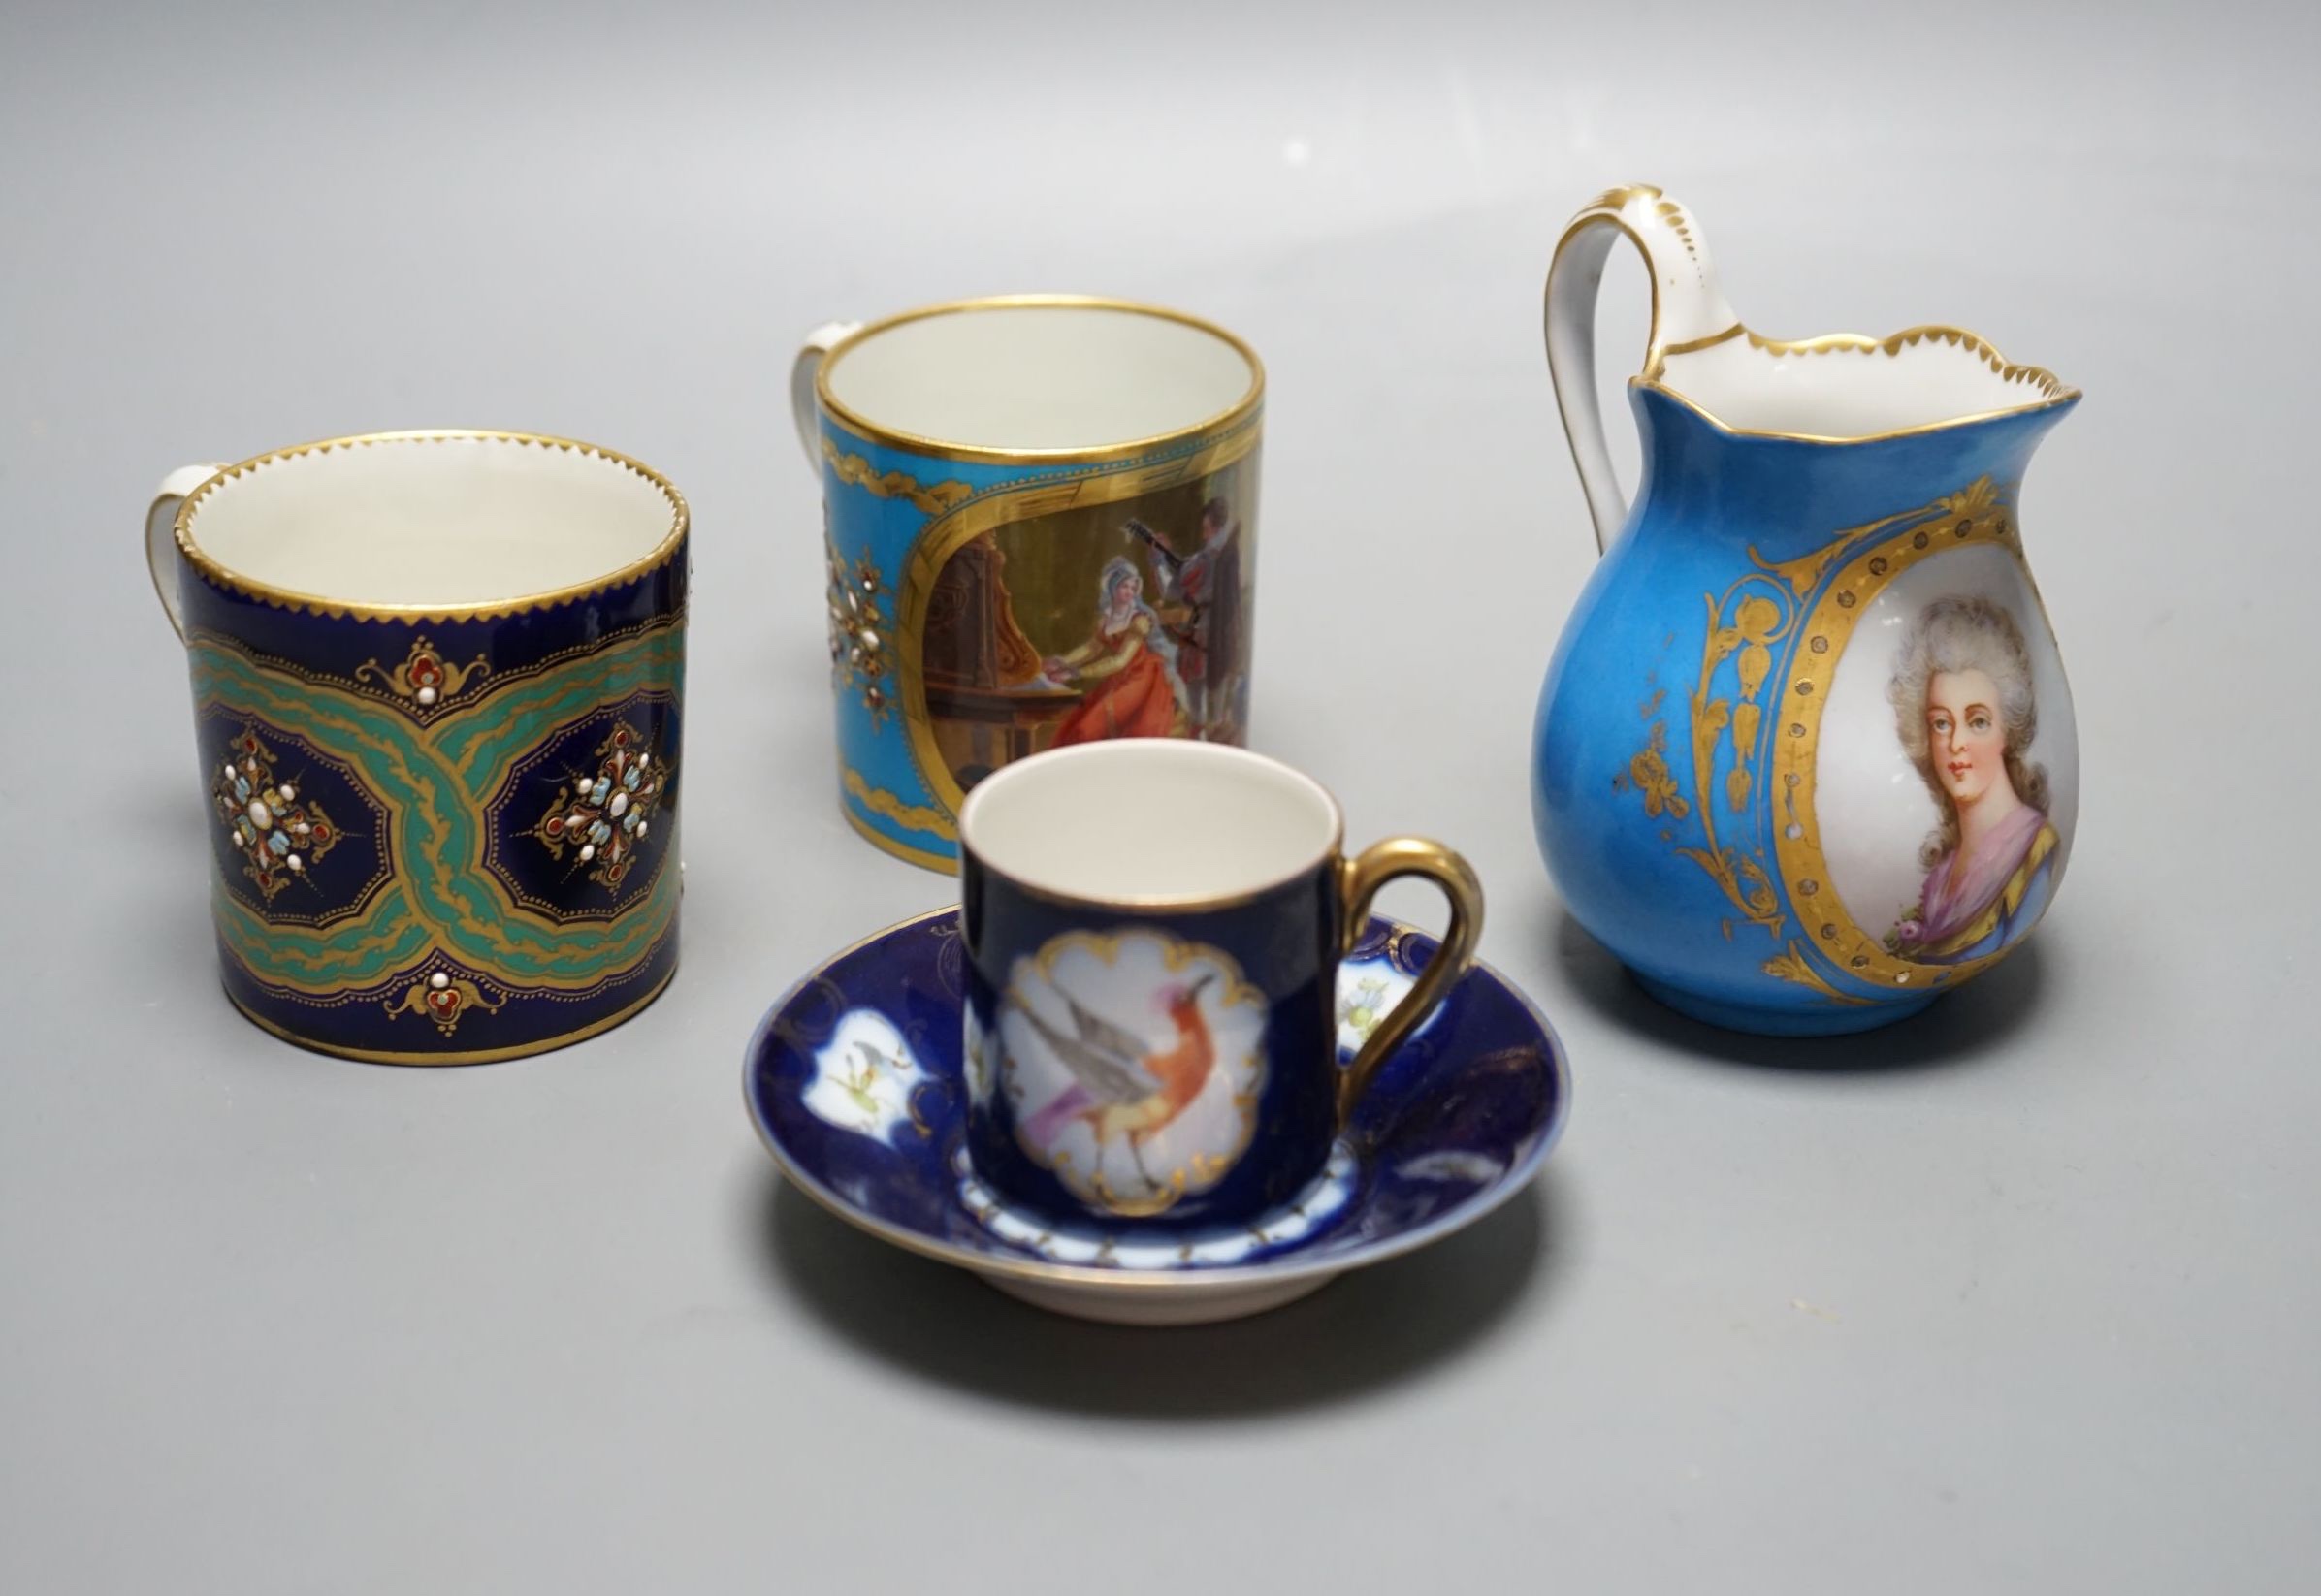 Two Sevres style porcelain coffee cans, cream jug and a cup and saucer, tallest ug 10 cms high.